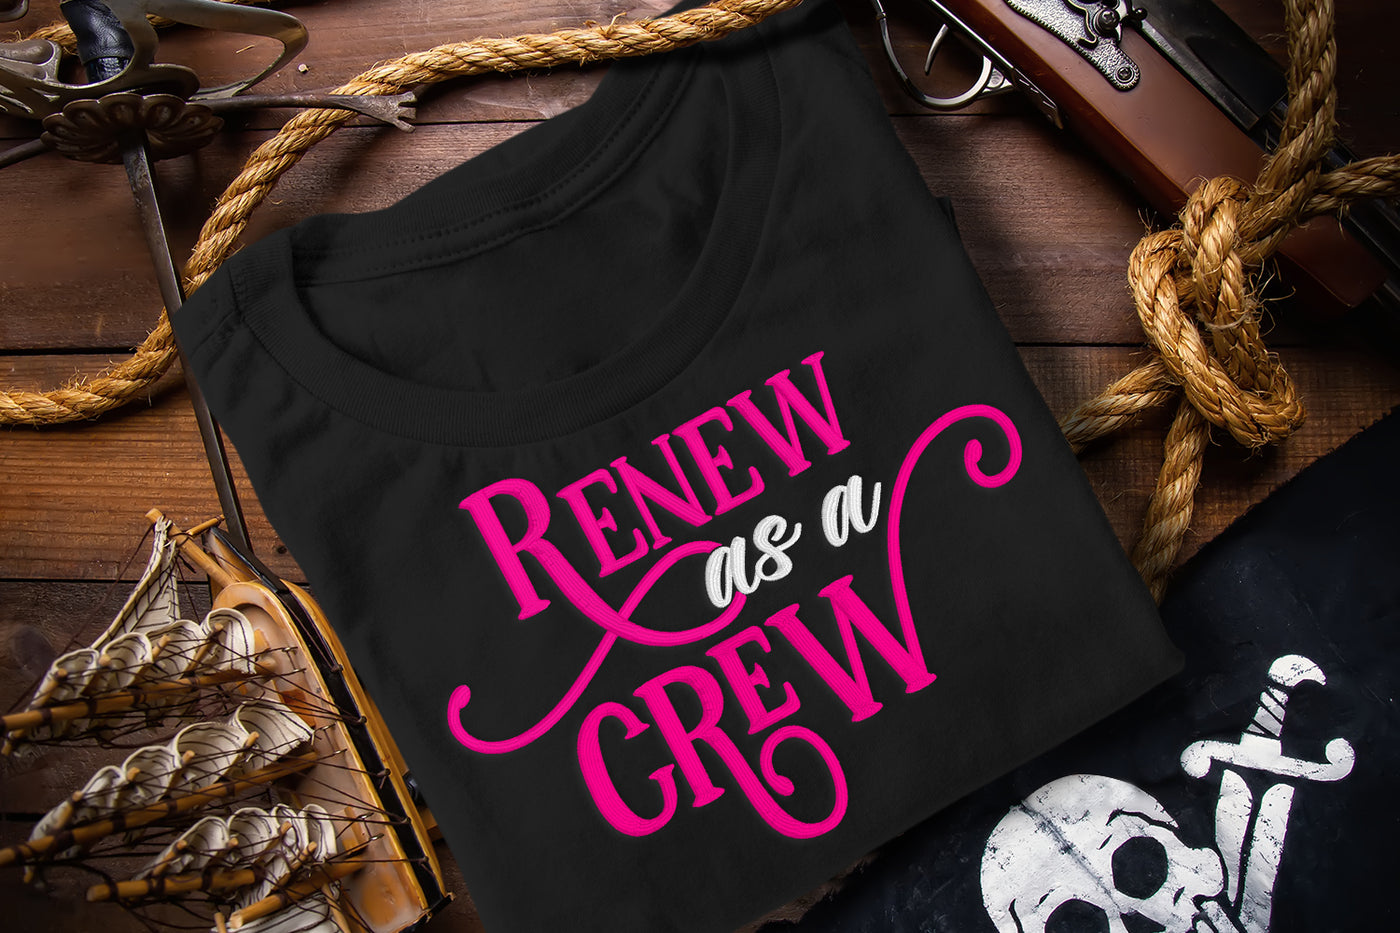 Renew as a Crew Embroidery File